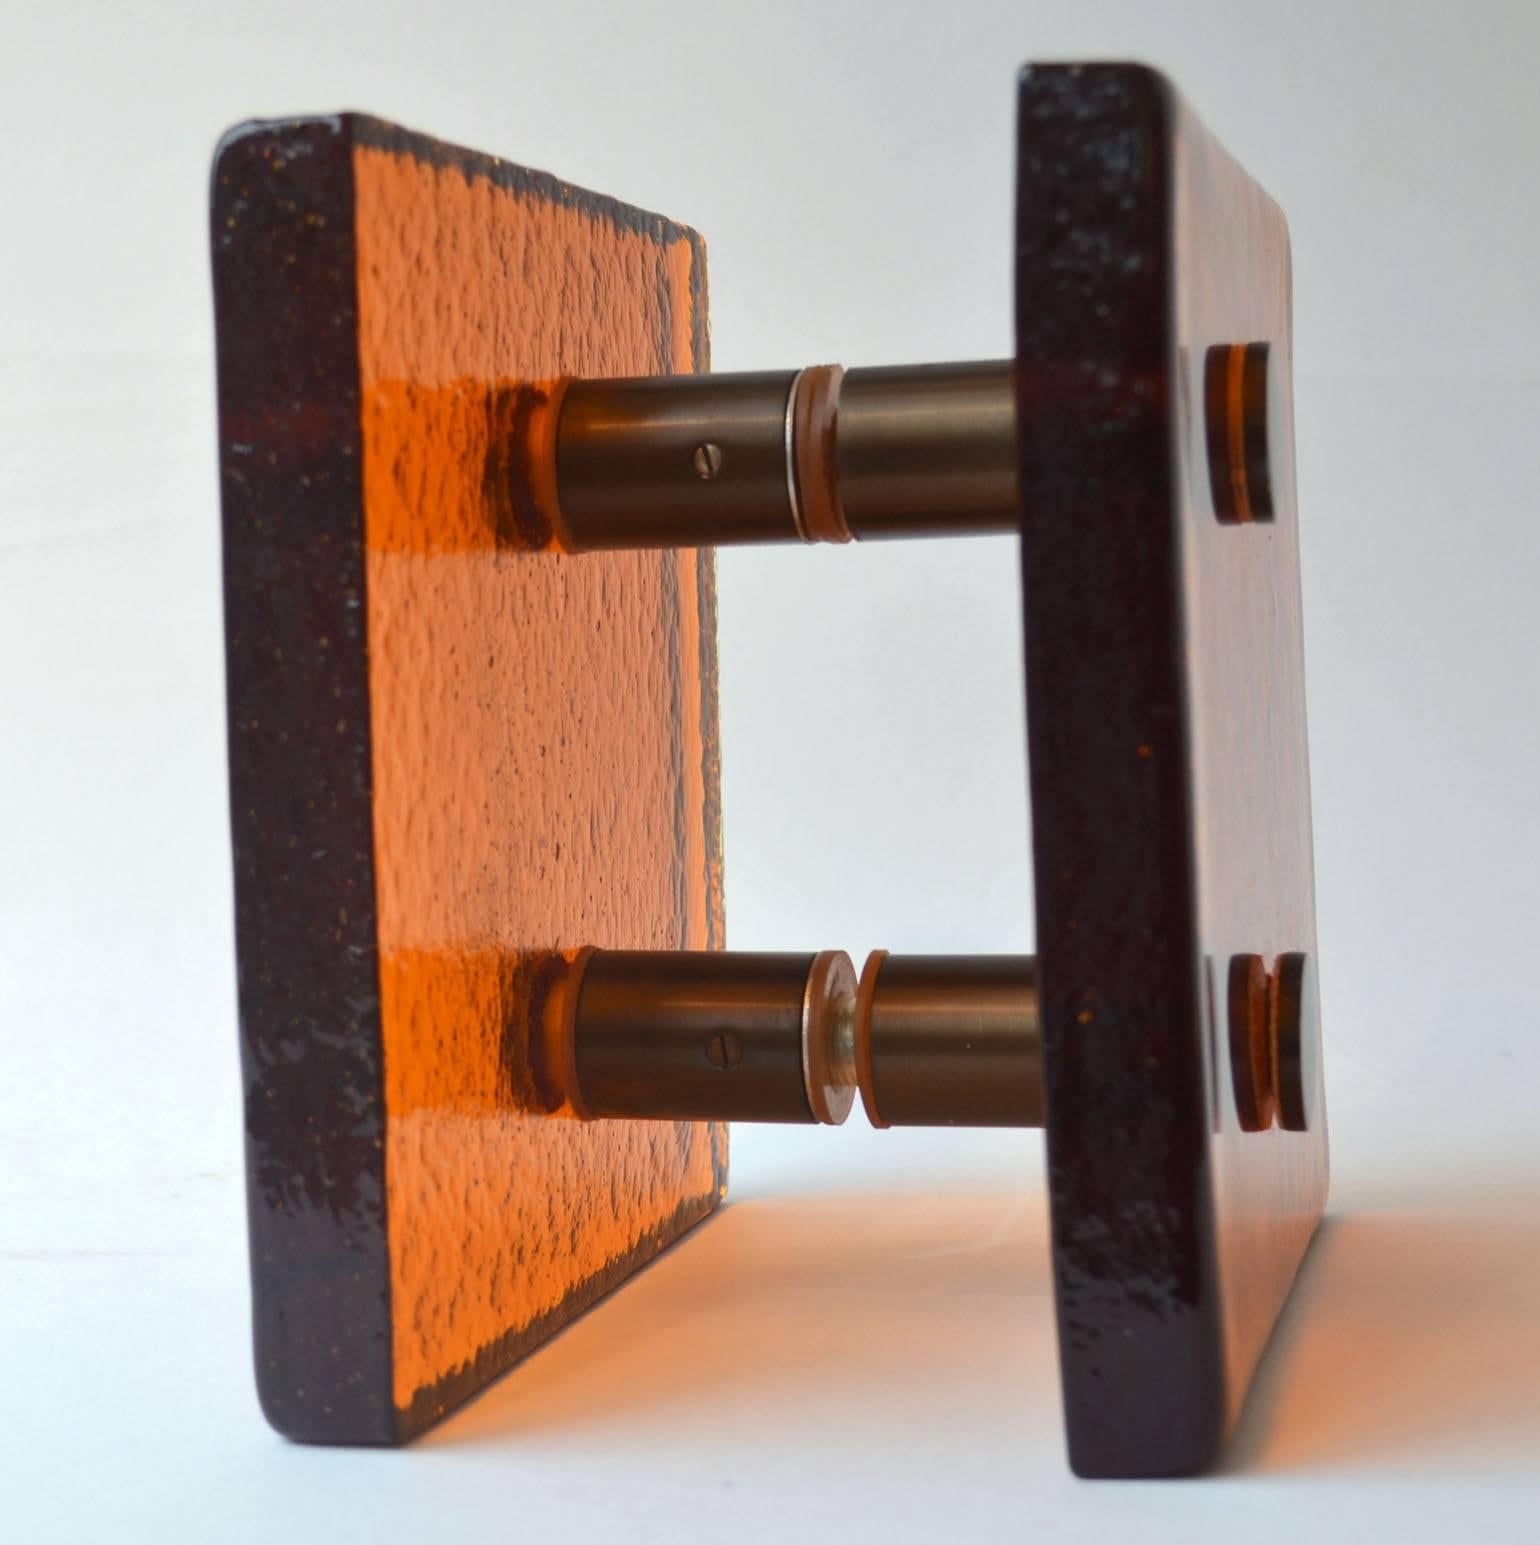 Orange glass cast square glass push and pull door handle with brass fittings designed for a glass door, French 1960's.
The fixings can be adjusted for wooden doors.

Thickness of the glass; 25 mm
Distance of spacer between the glass and door; 40 mm